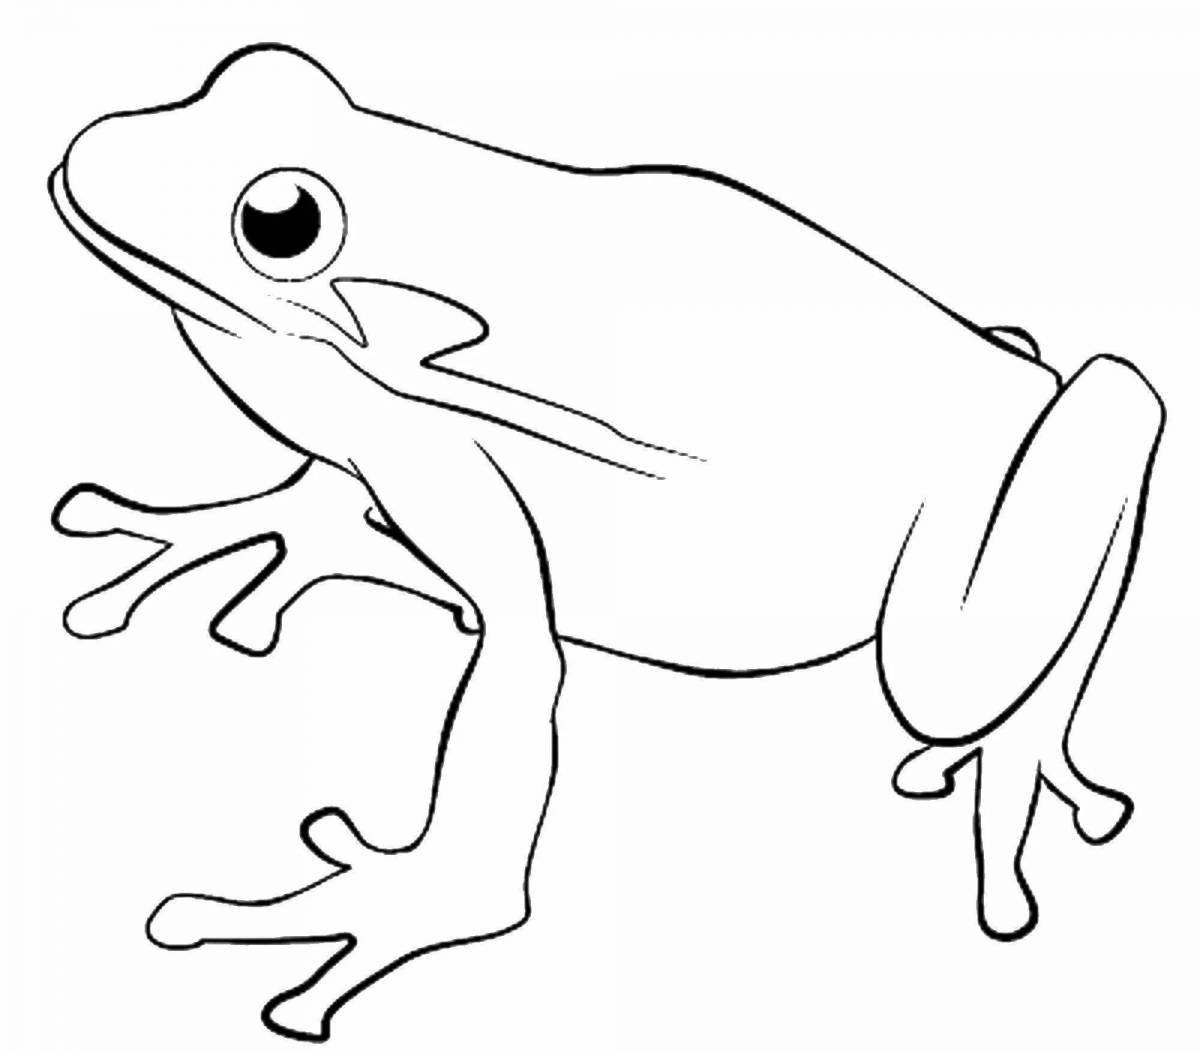 Charming frog coloring page